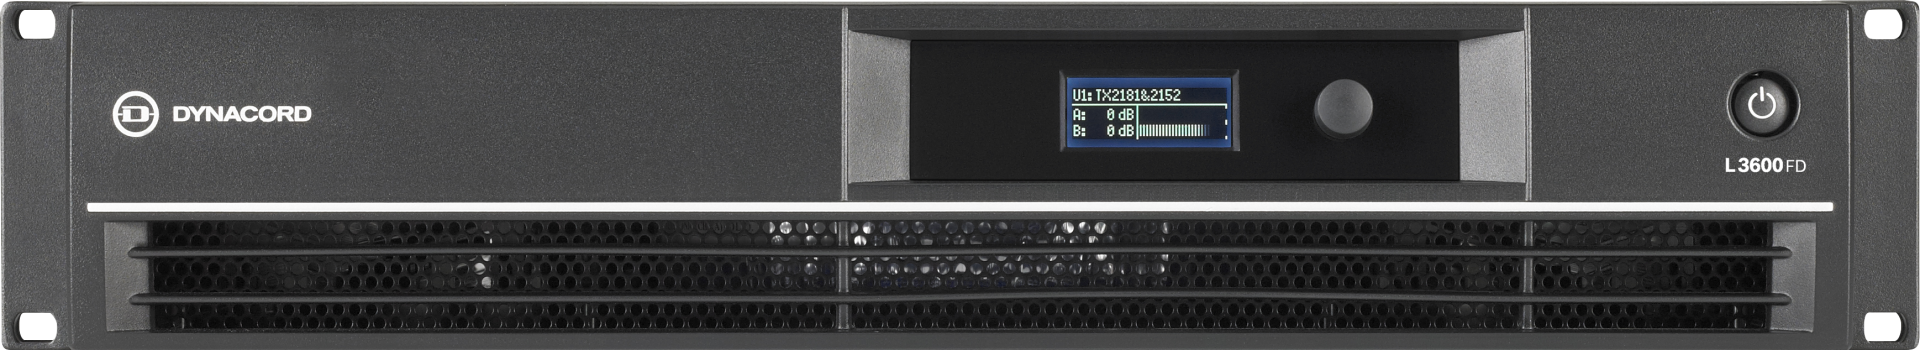 Dynacord L3600FD DSP 2 x 1800W Power Amplifier for Live Performance Applications - Each